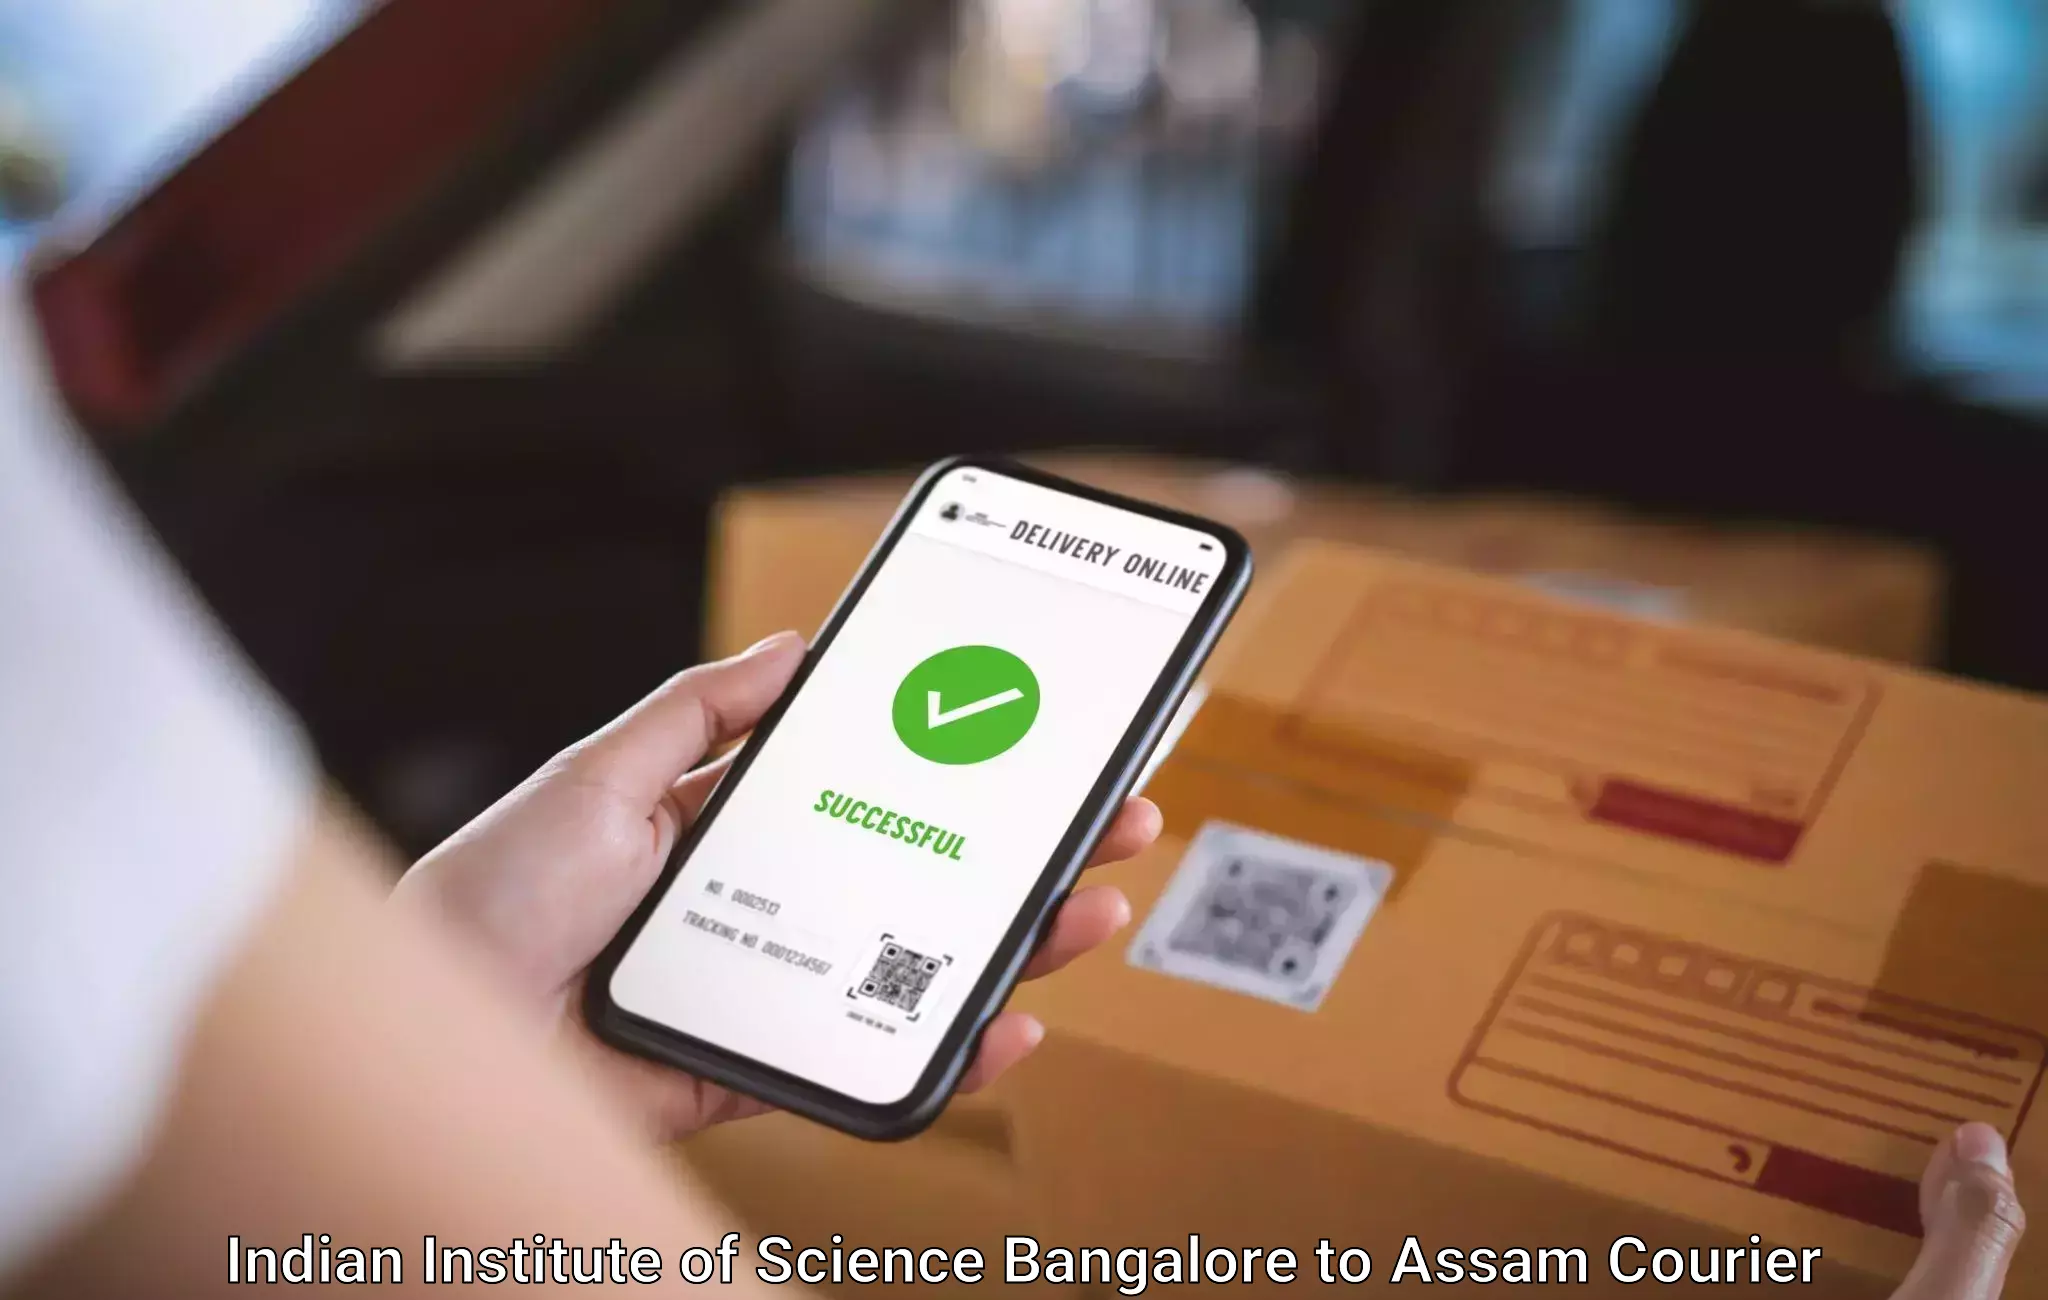 Luggage shipping service Indian Institute of Science Bangalore to Assam